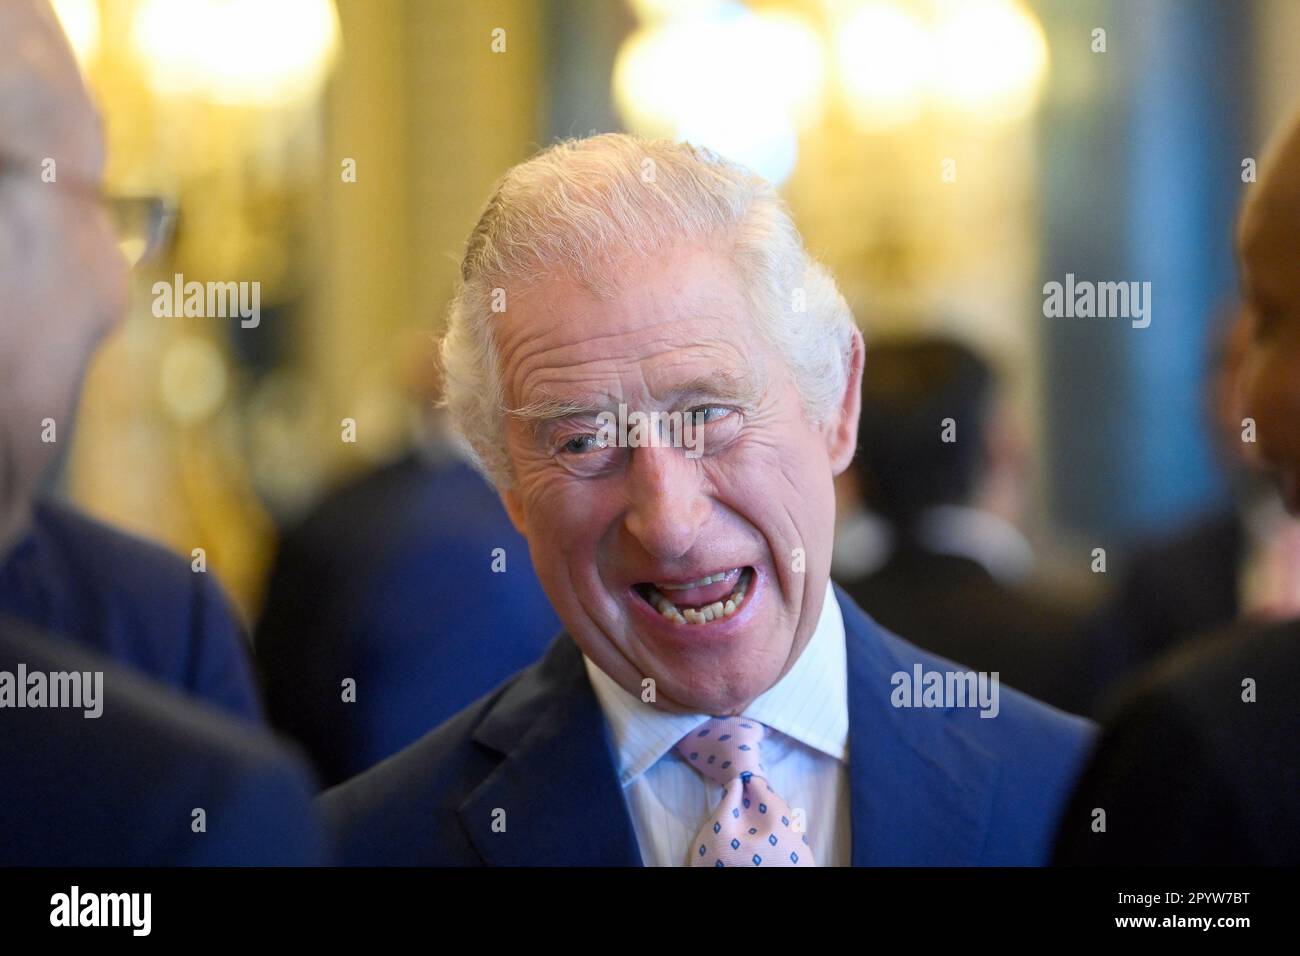 King Charles III, accompanied by members of the royal family, attends a Realm Governors General and Prime Ministers Lunch at Buckingham Palace in London, ahead of his coronation. Picture date: Friday May 5, 2023. Stock Photo